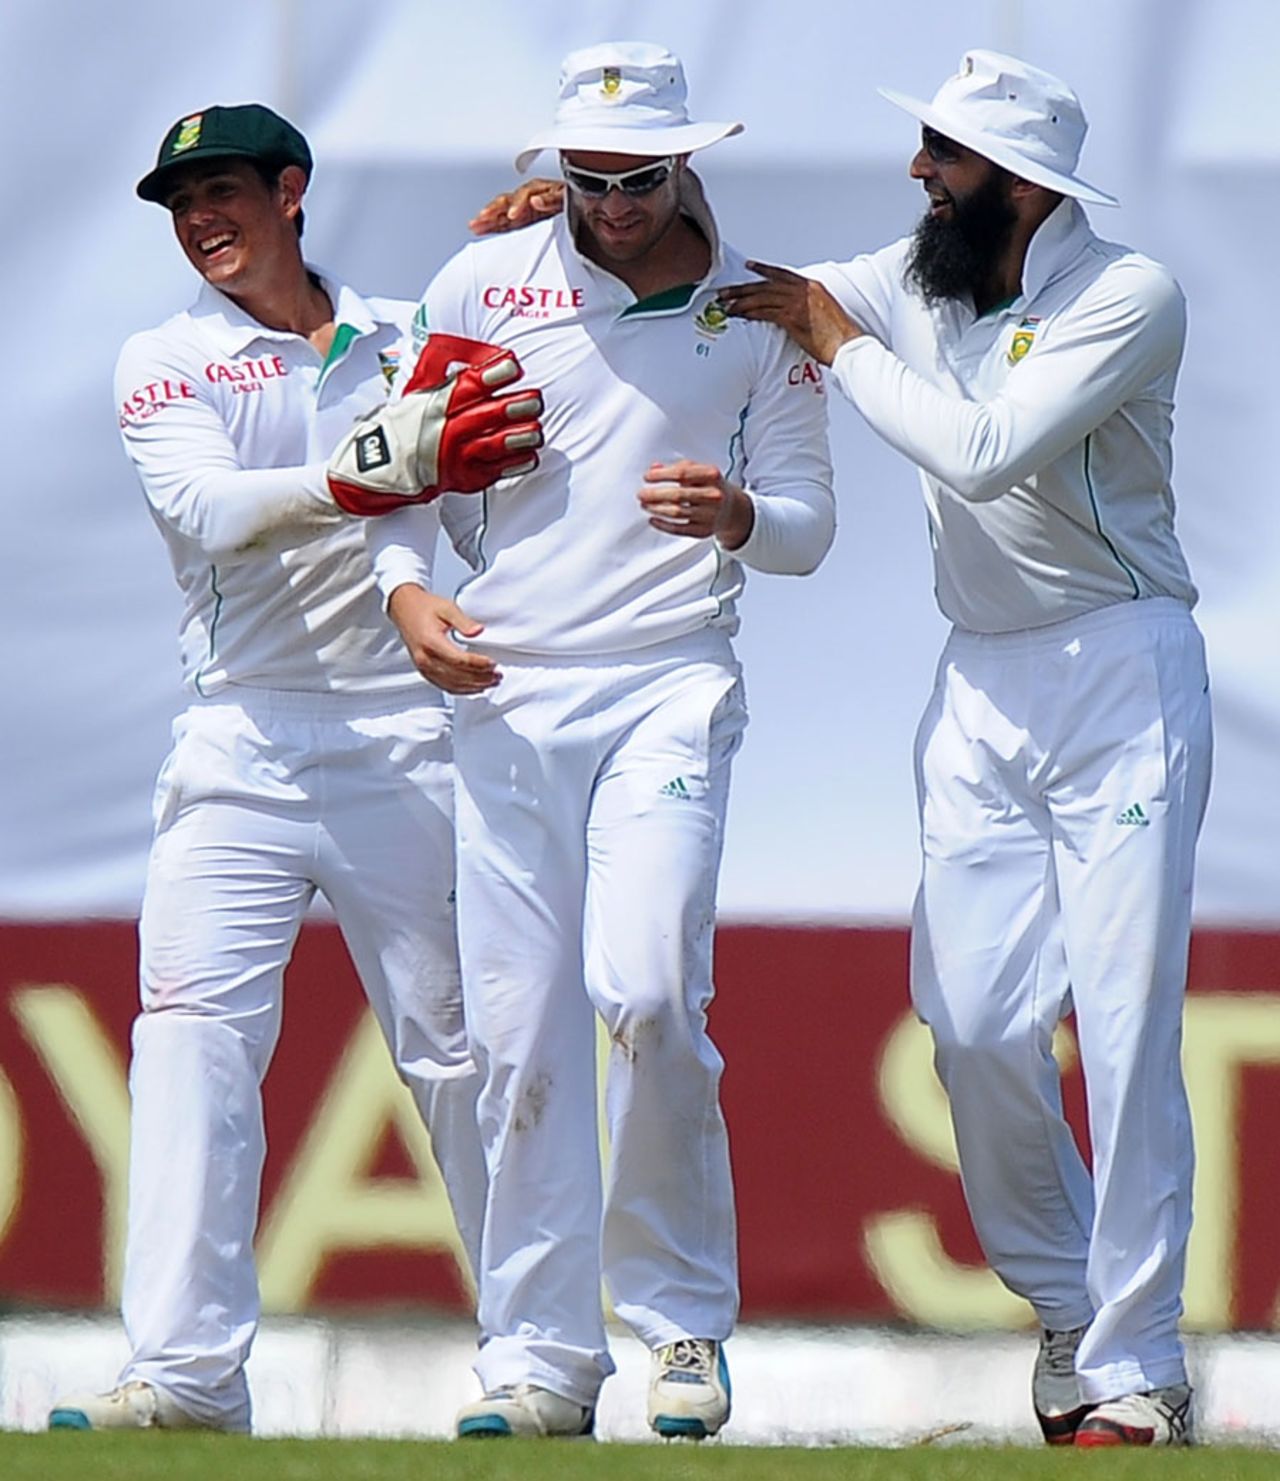 Quinton de Kock, AB de Villiers and Hashim Amla celebrate a wicket, Sri Lanka v South Africa, 1st Test, Galle, 4th day, July 19, 2014